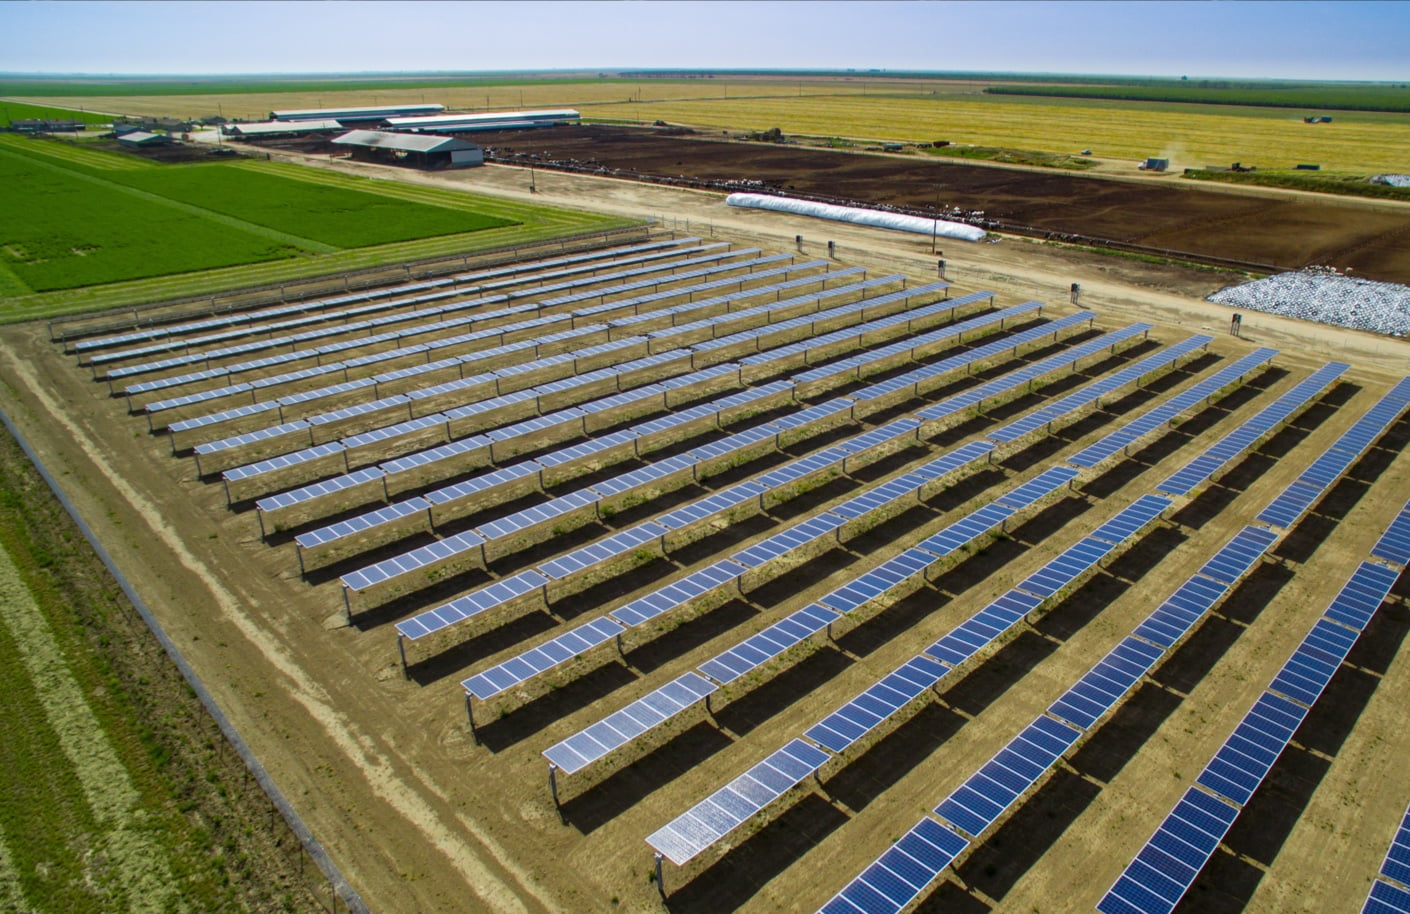 Birds eye view of solar farm with rows of blue panels surrounded by green agriculture fields.